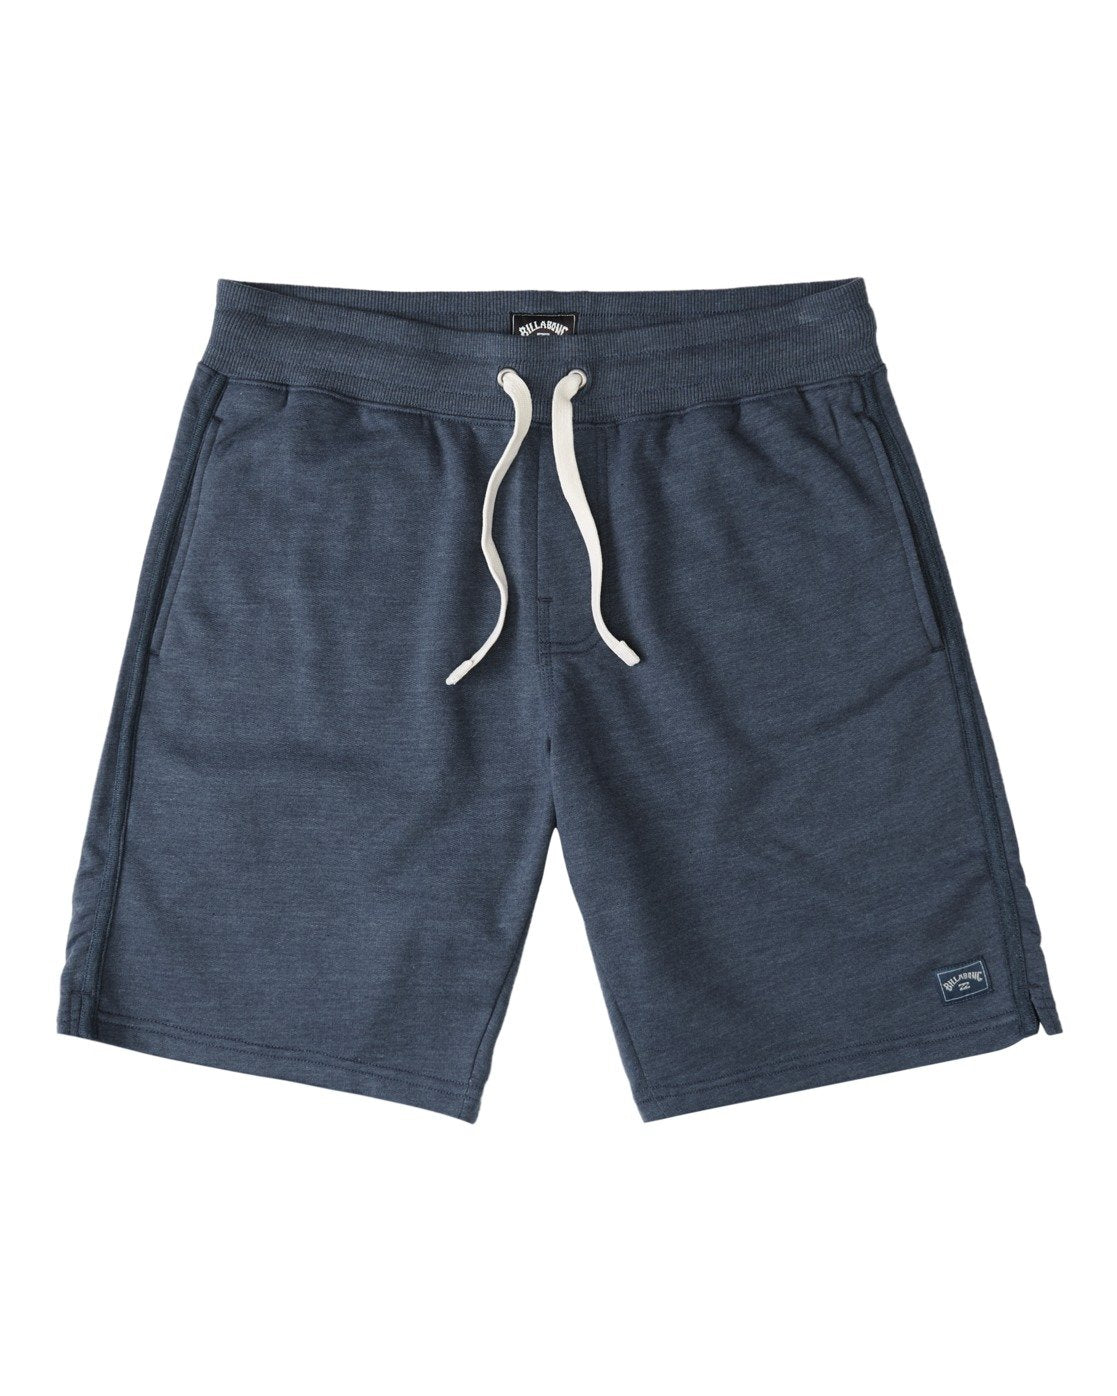 ALL DAY SHORT - M2513BAS